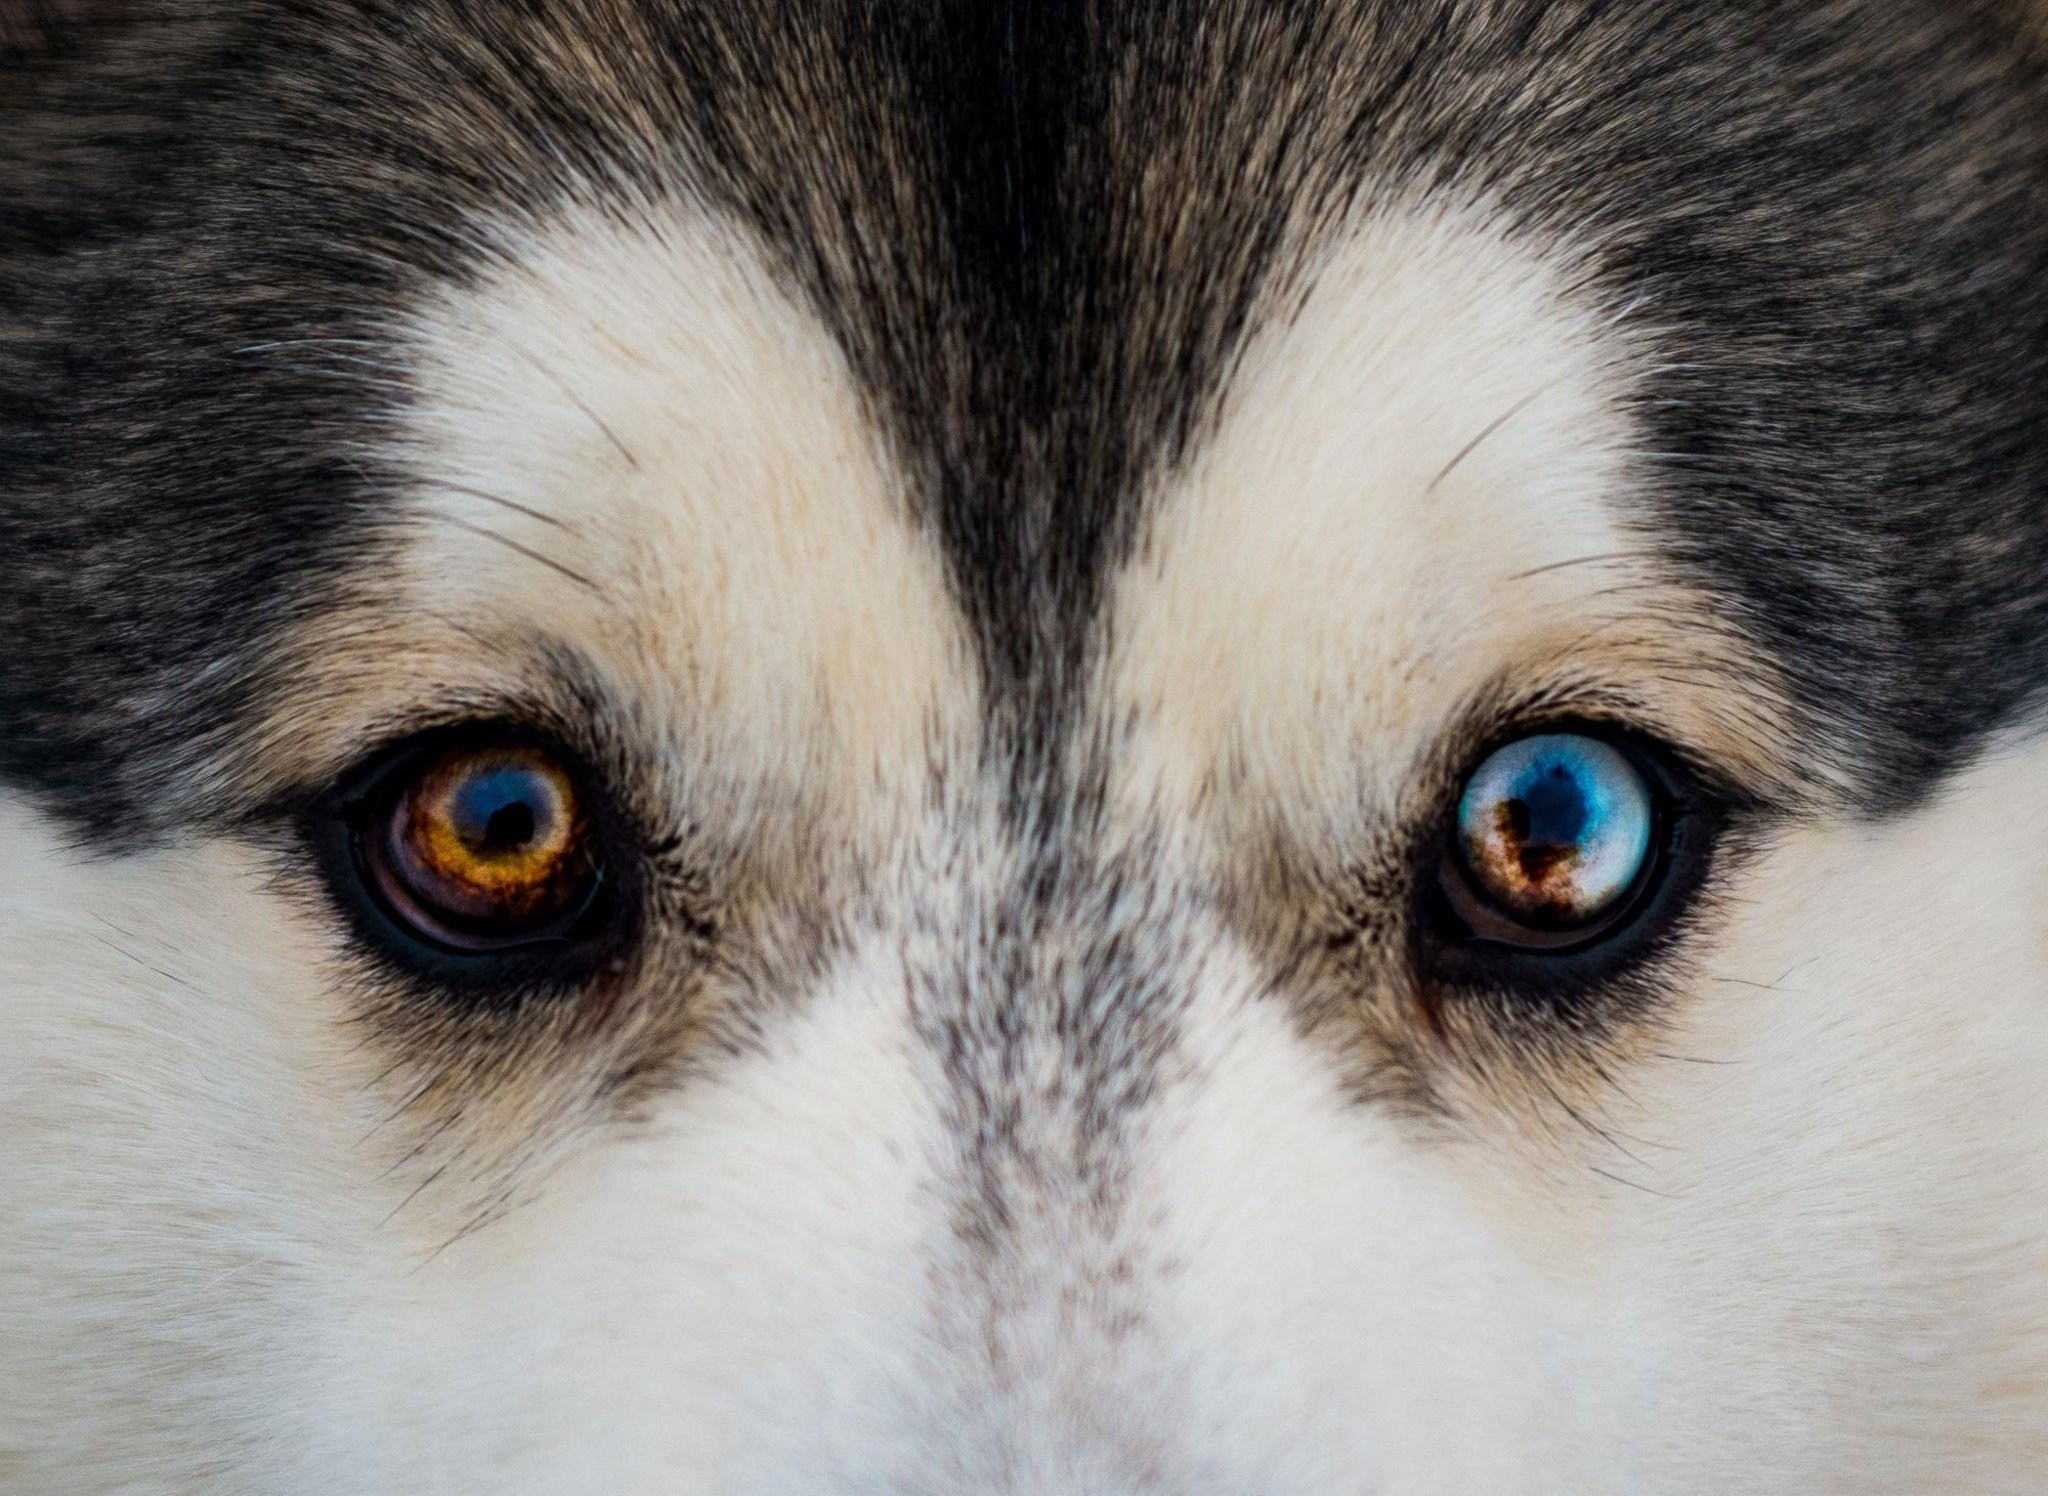 Here are the 10 breeds of adorable dog most at risk of suffering eye problems